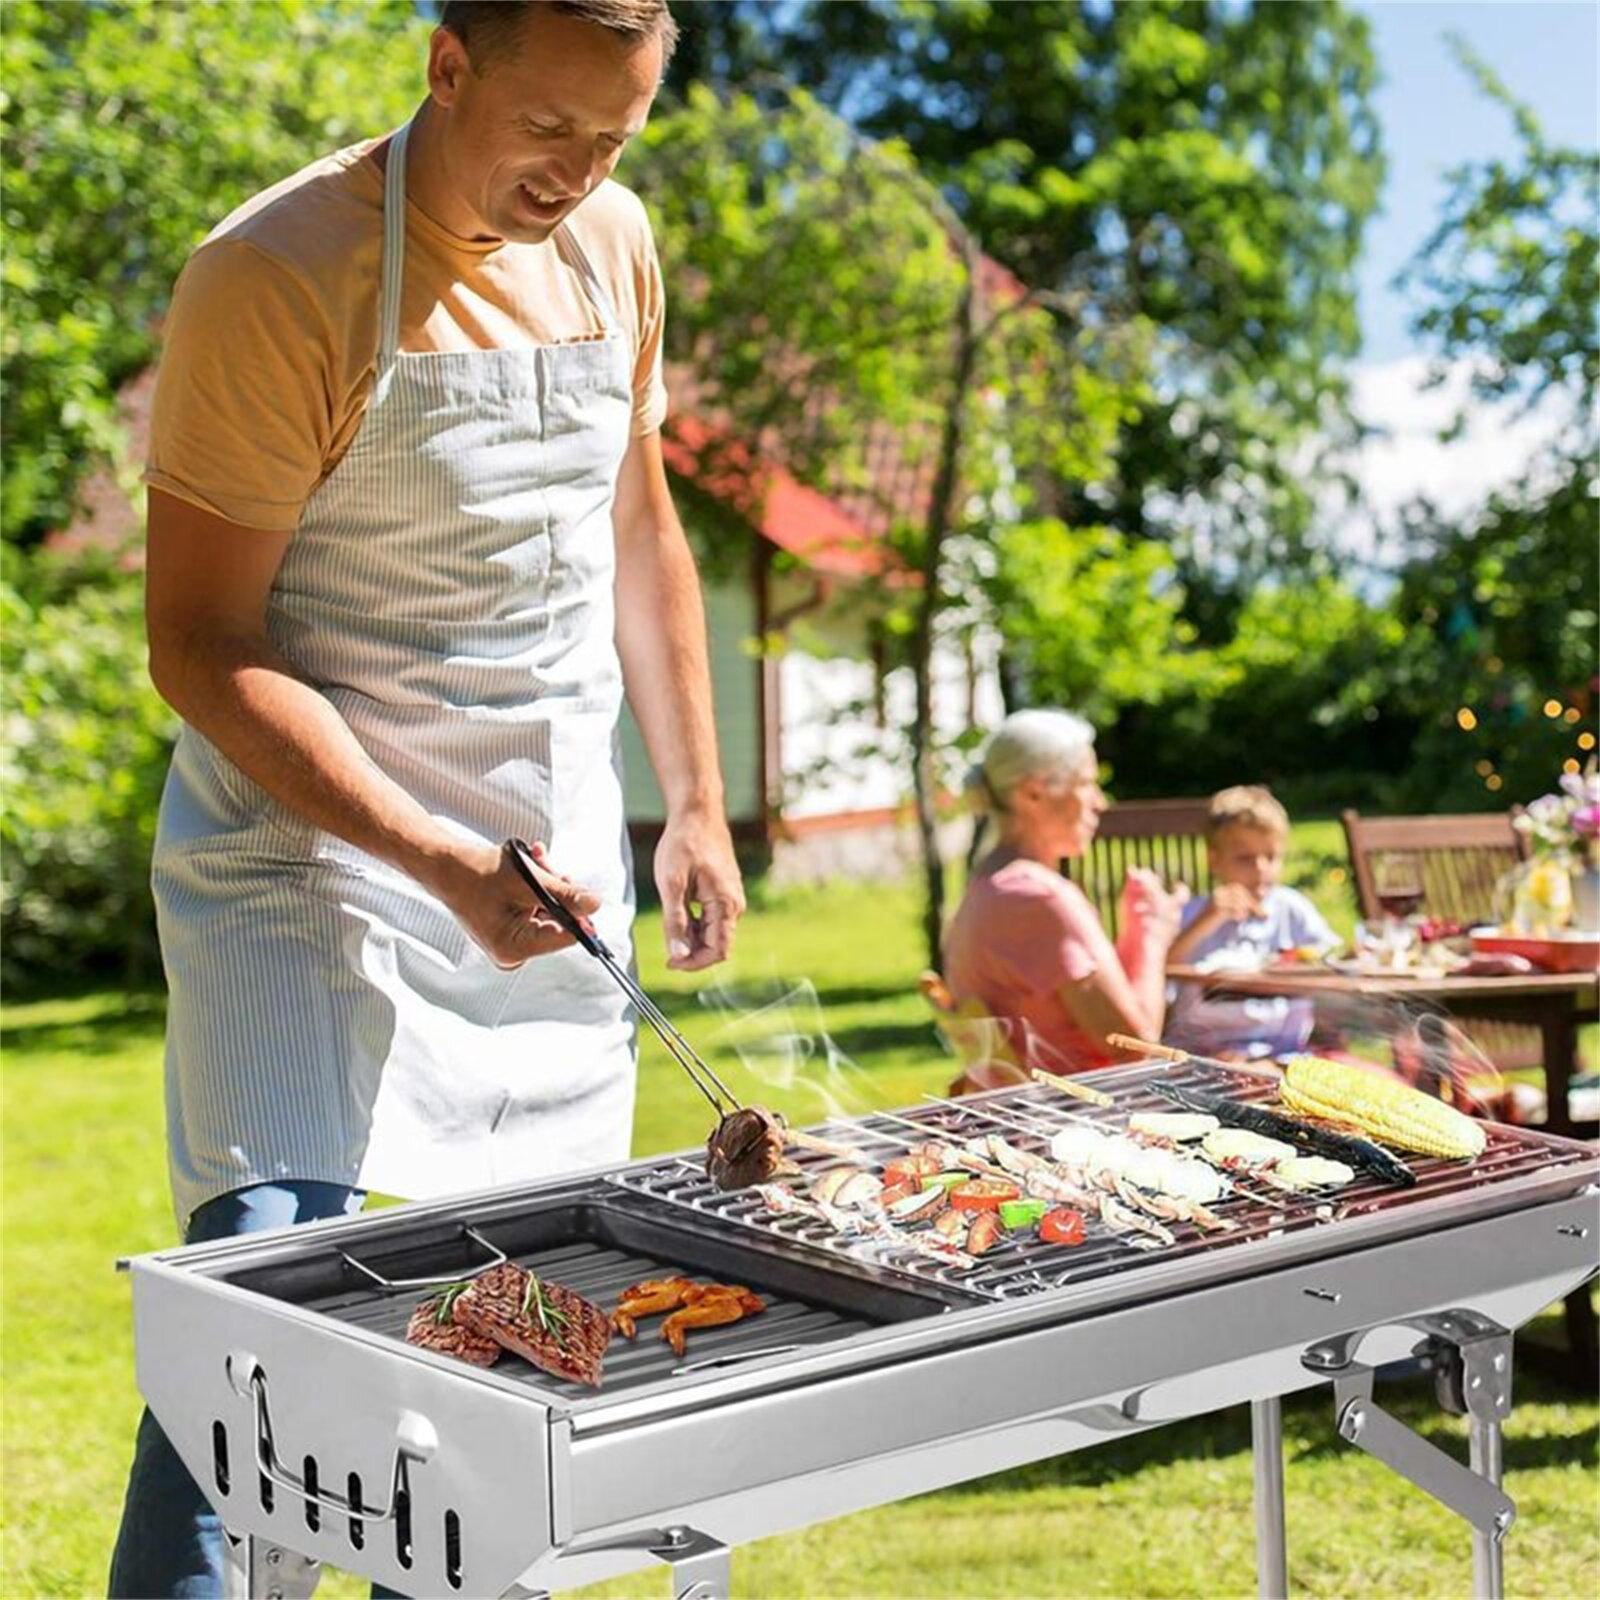 Details about   Portable Smokeless Barbecue Electric Grill Stove Shish Kabob BBQ Patio Camping 